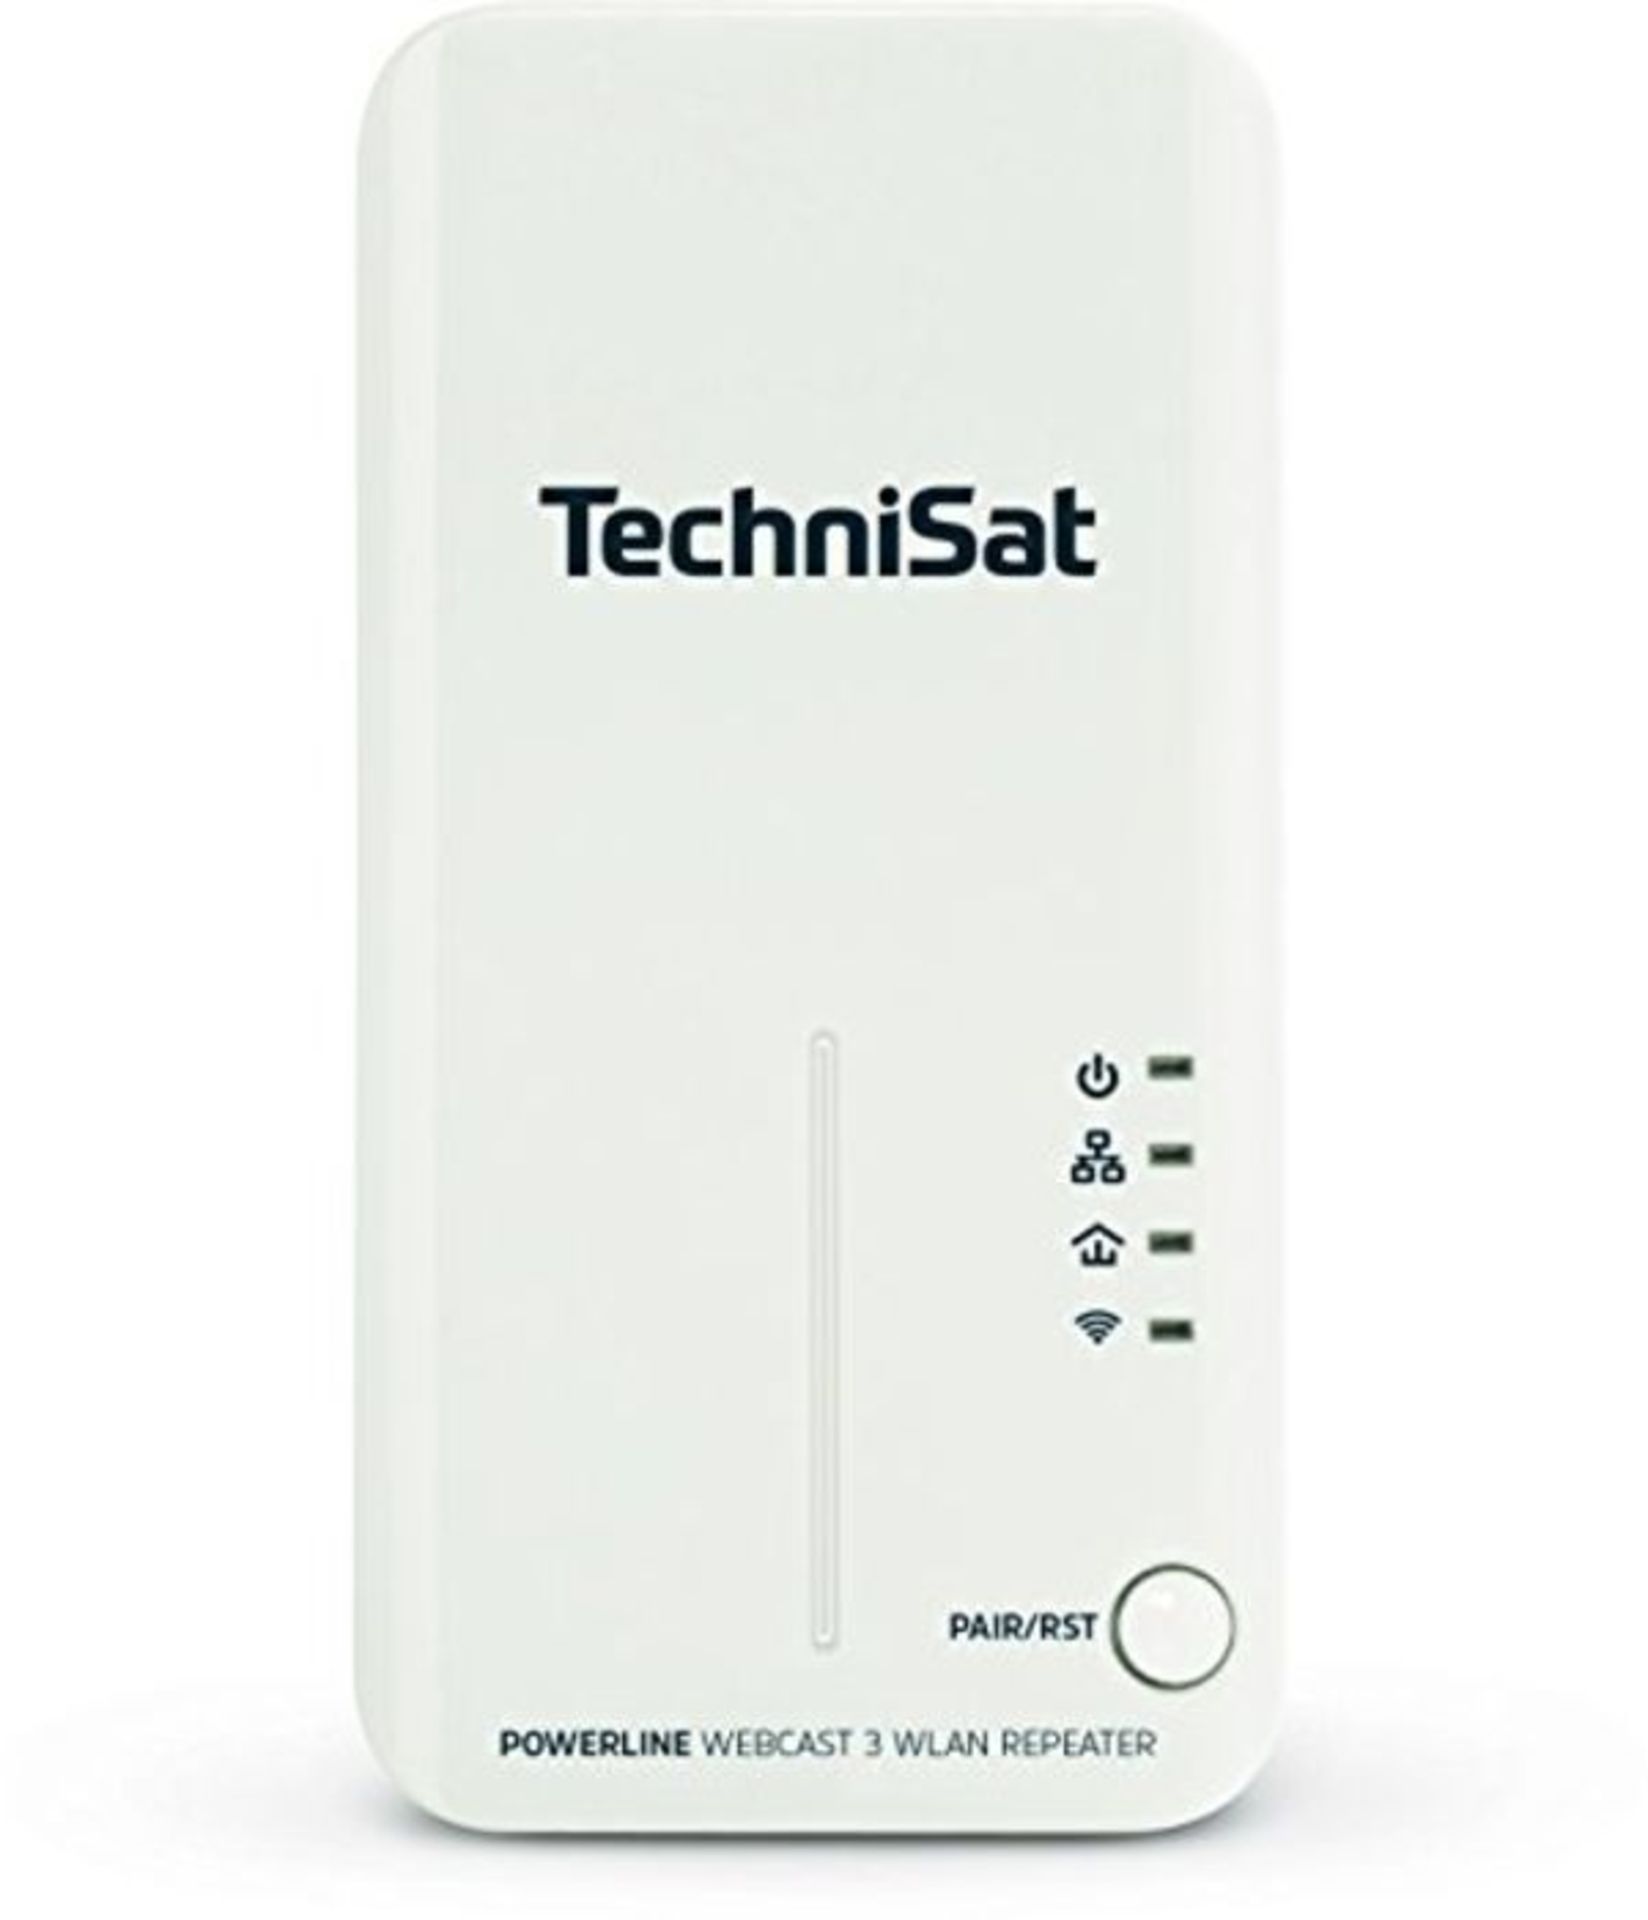 TechniSat Powerline WebCast 3 WLAN Repeater (to extend the range of existing WLAN netw